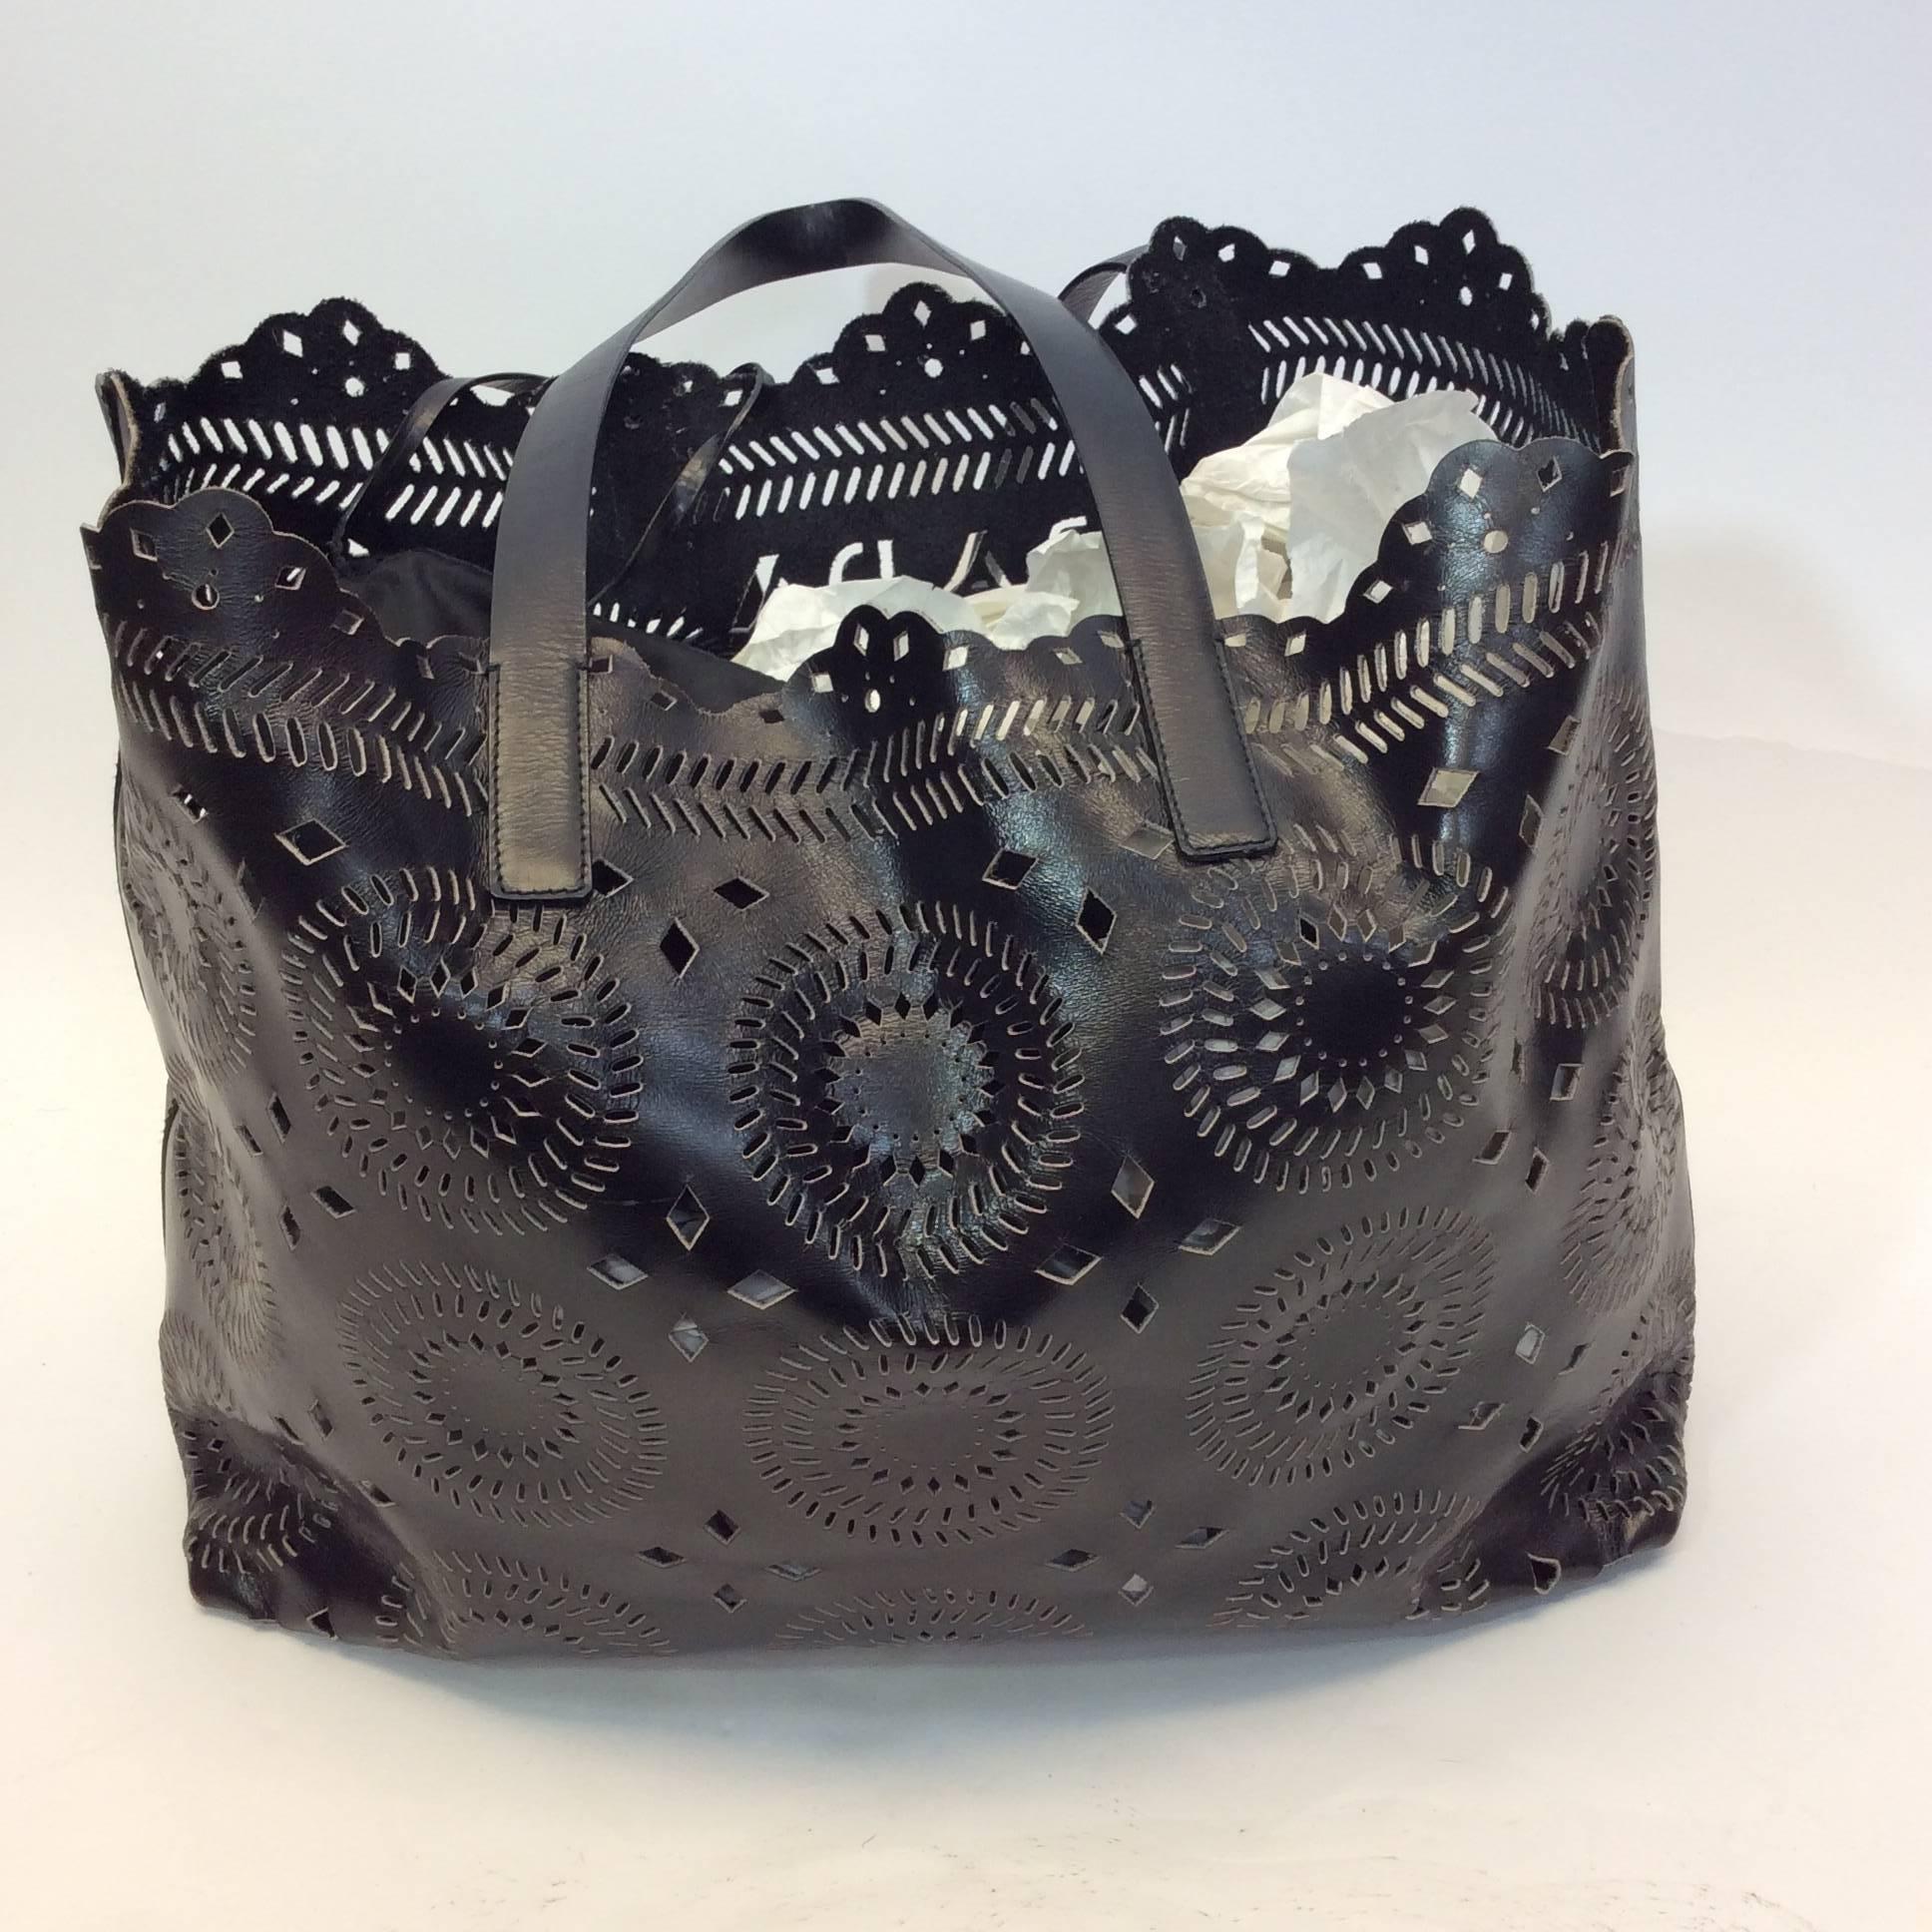 Prada Black Mandala Laser Cut Tote Bag In Excellent Condition For Sale In Narberth, PA